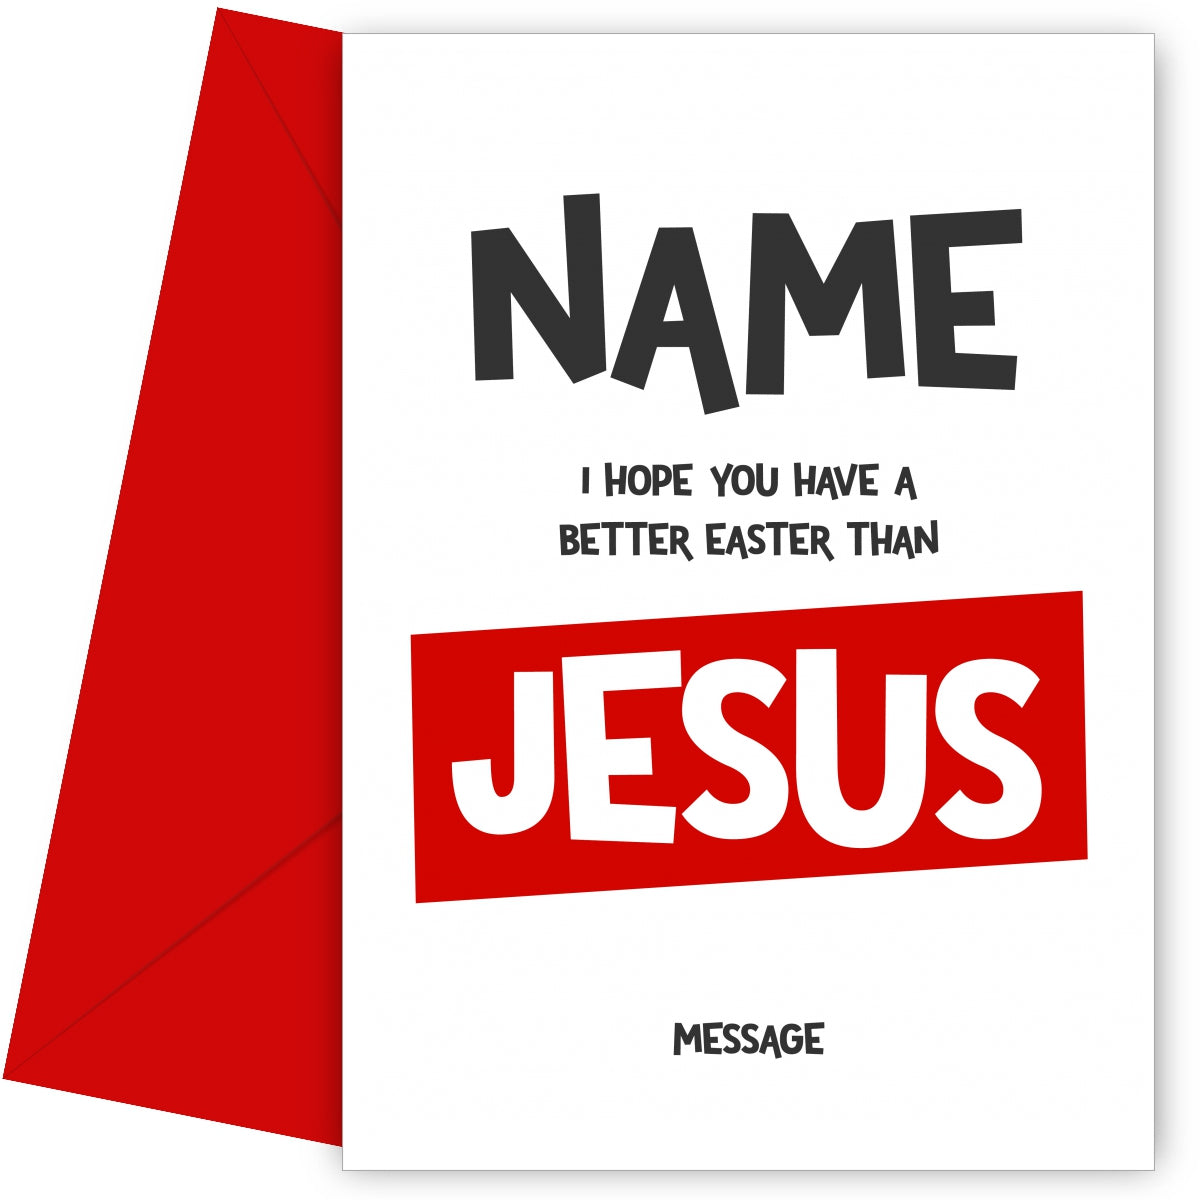 Humorous Religious Easter Card - I Hope You Have a Better Easter than Jesus!